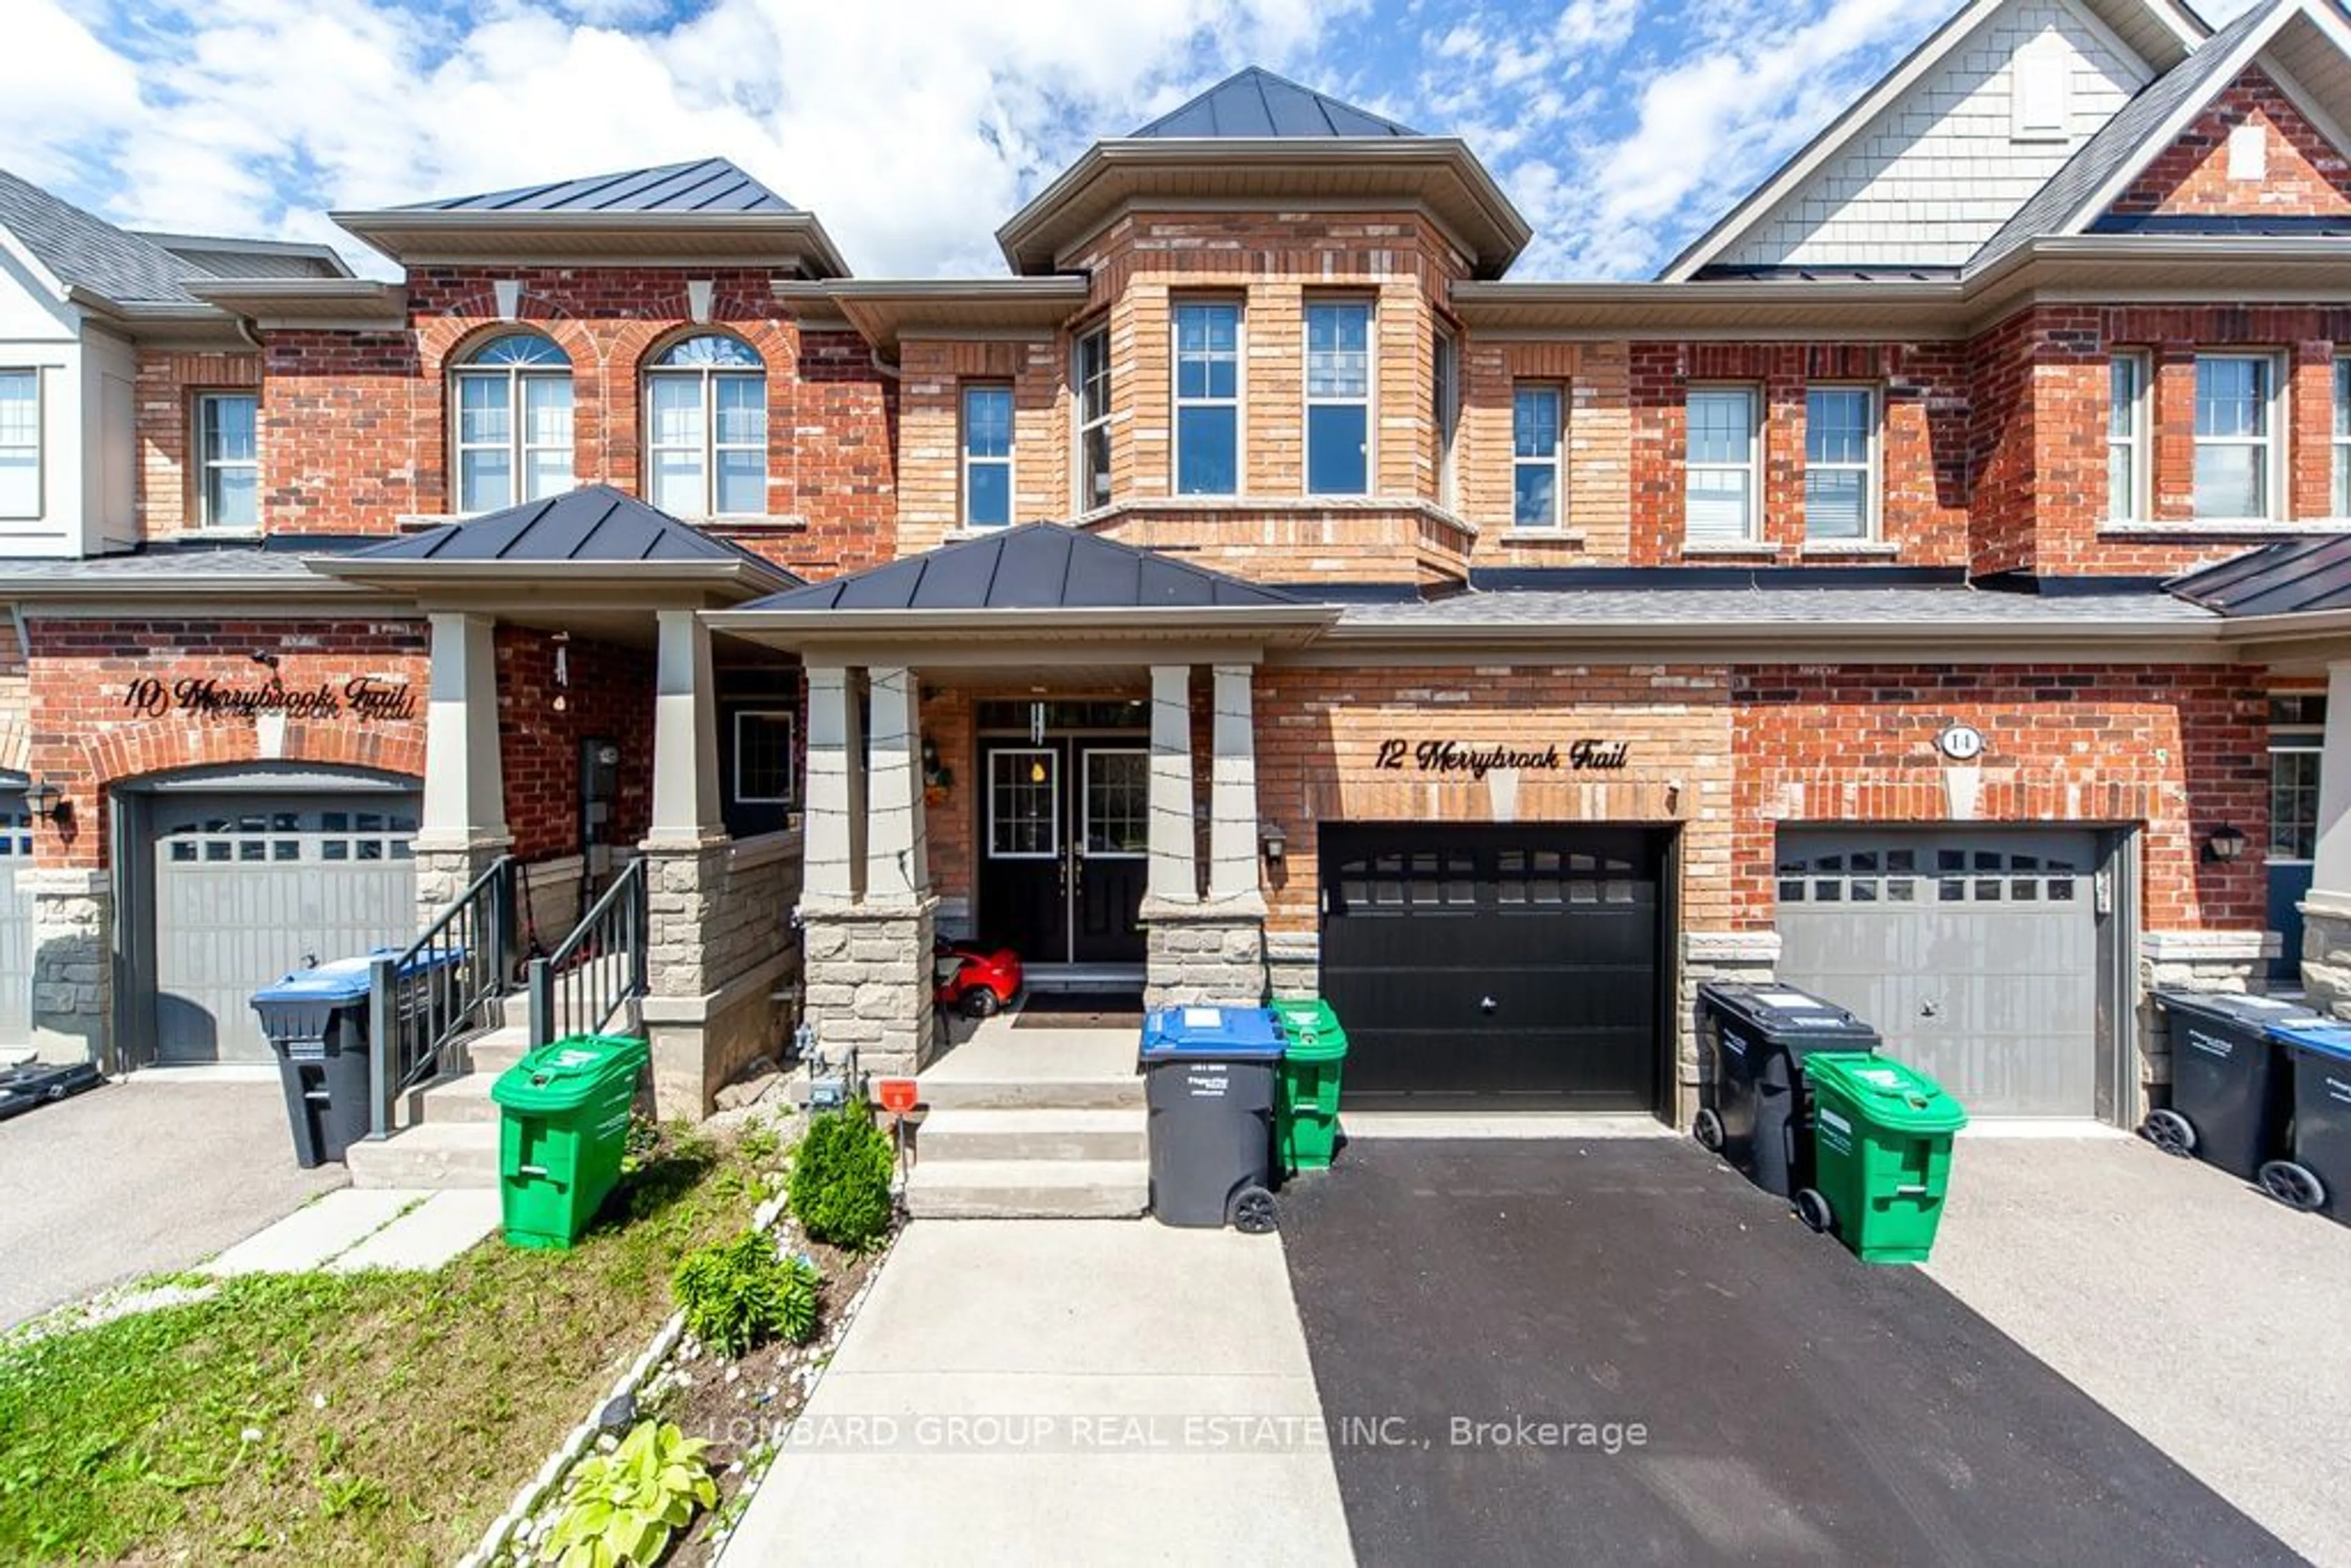 Home with brick exterior material for 12 Merrybrook Tr, Brampton Ontario L7A 4W1